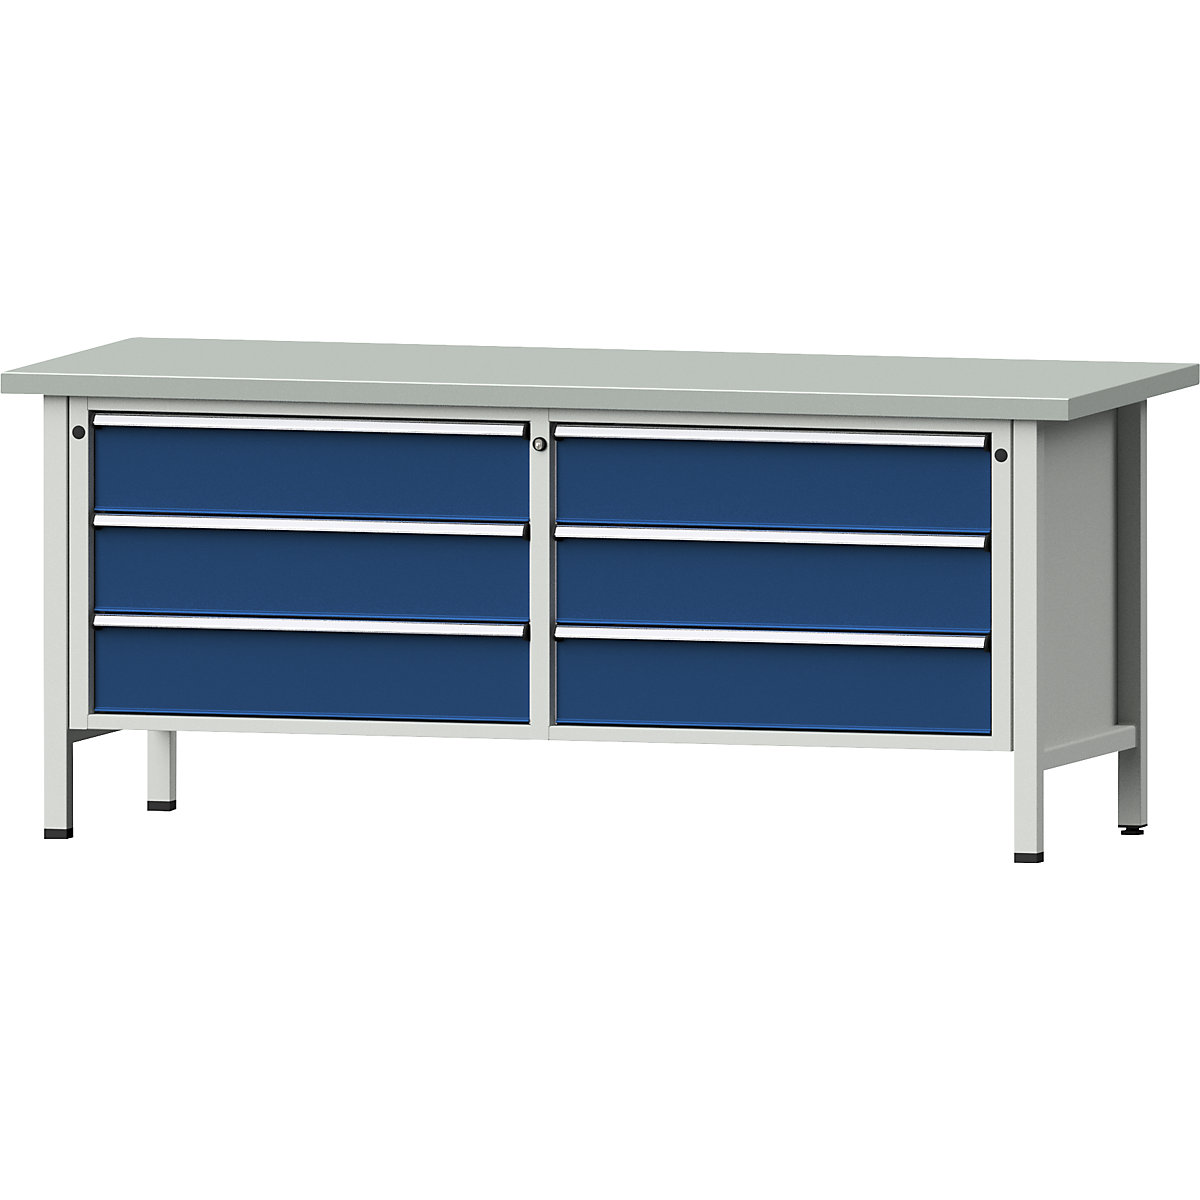 Workbench with XL/XXL drawers, frame construction – ANKE, width 2000 mm, 6 x 180 mm drawers, sheet steel covered worktop, front in gentian blue-10